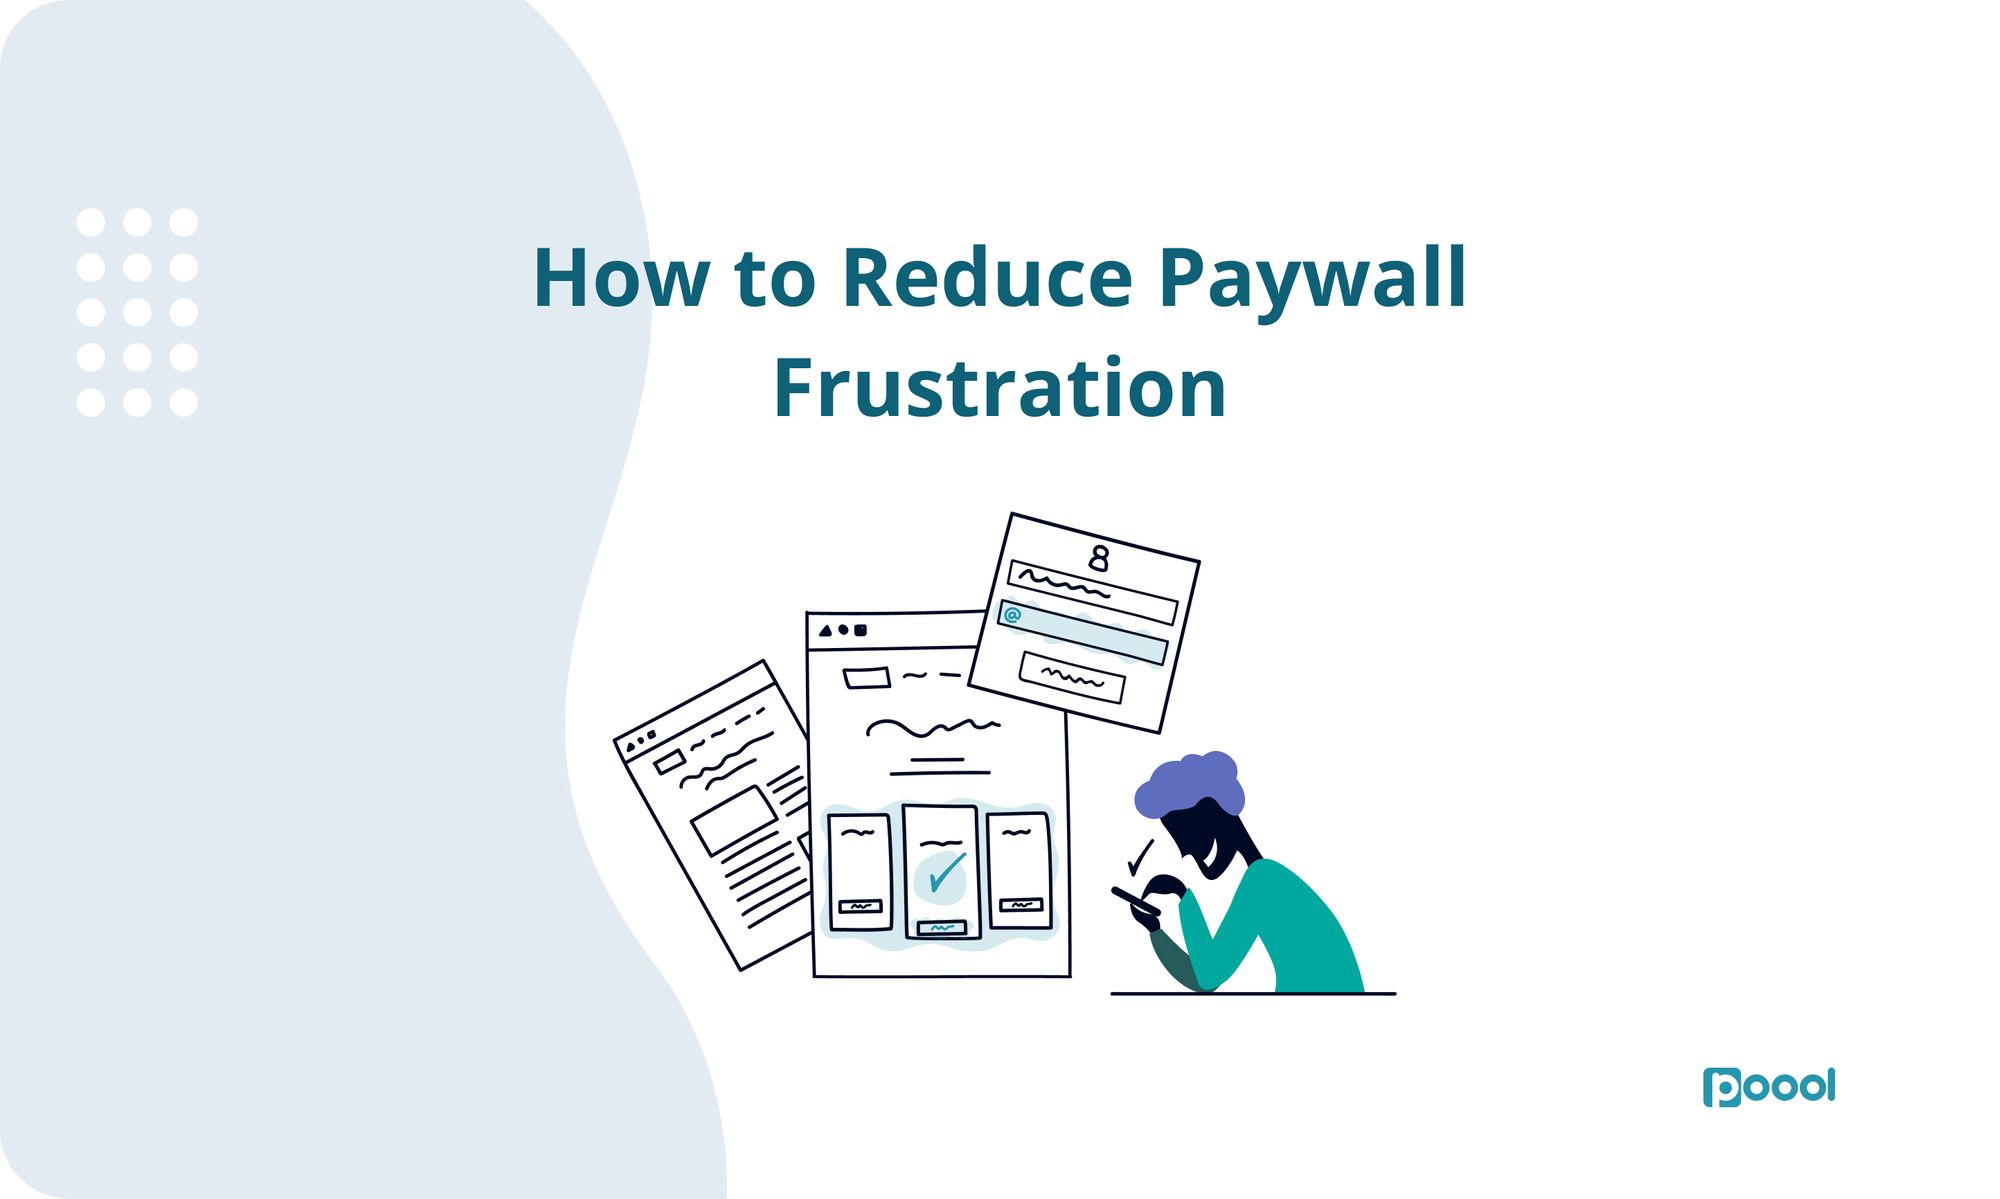 How to Reduce Paywall Frustration.